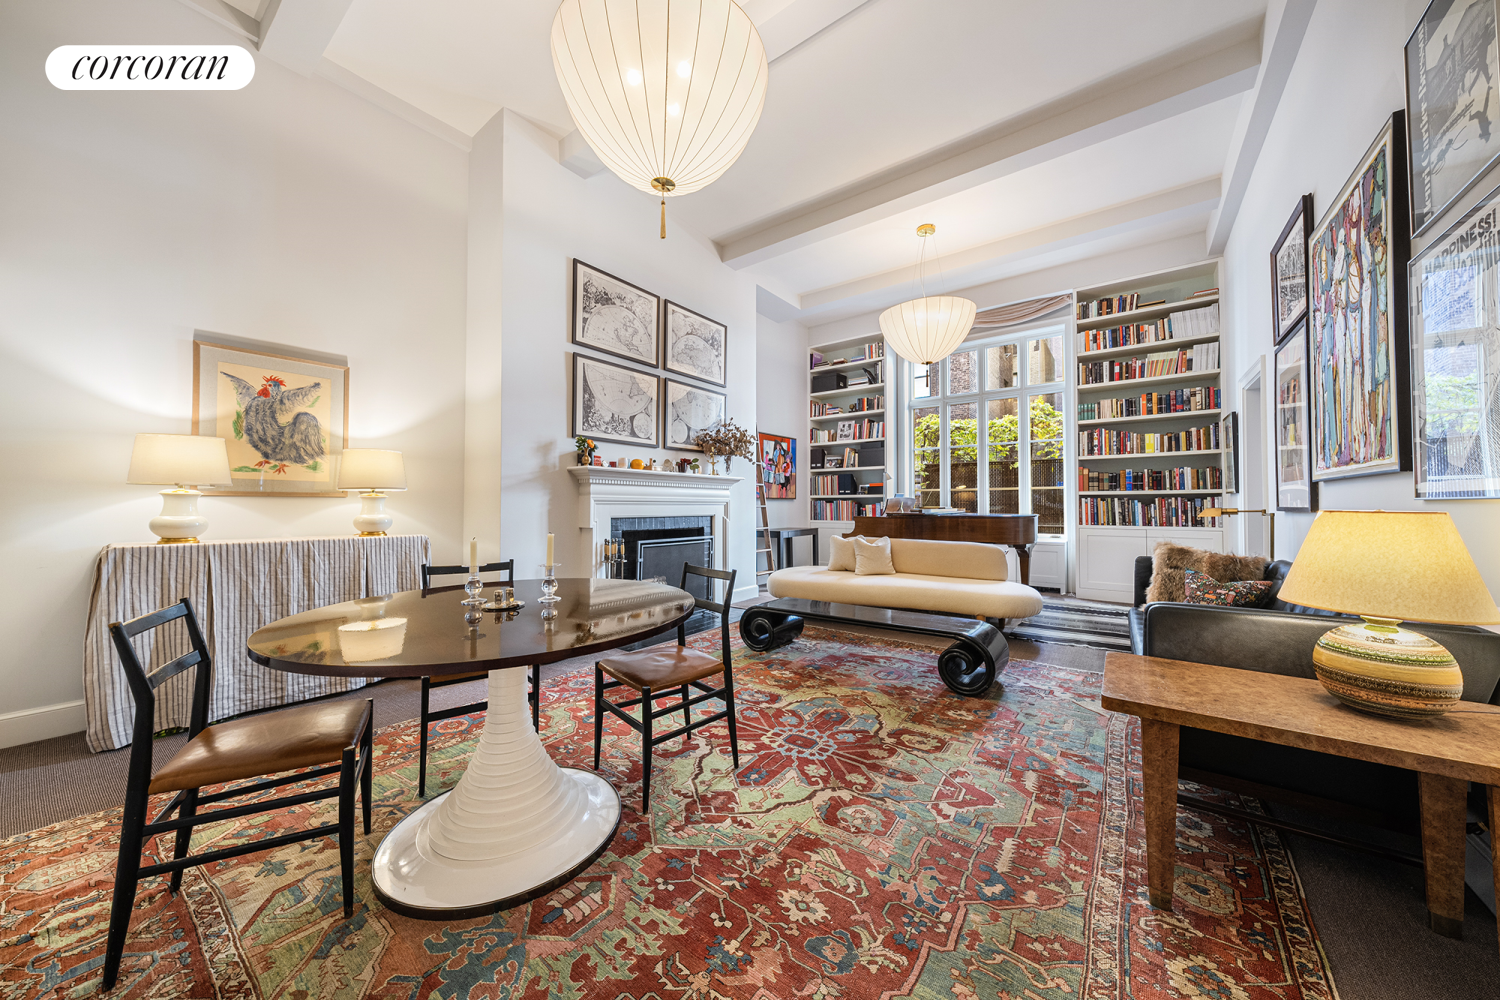 169 East 78th Street #2D, New York, NY 10075 Property for sale